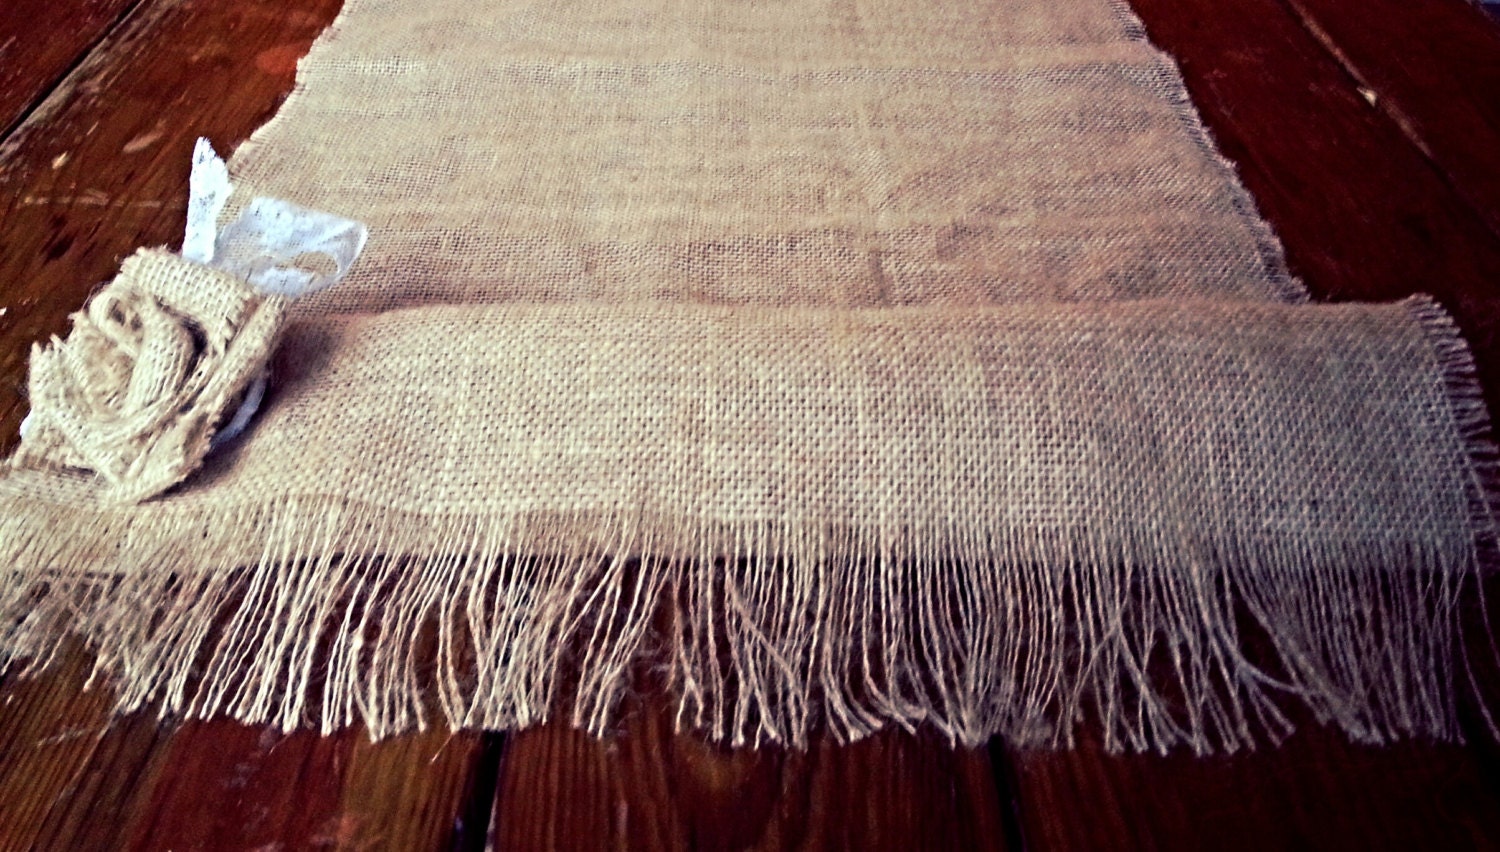 72 Inch Burlap Table Runner With Fringe Edging Burlap Rose and Lace Tan Color 72 - EverythingDawnHome